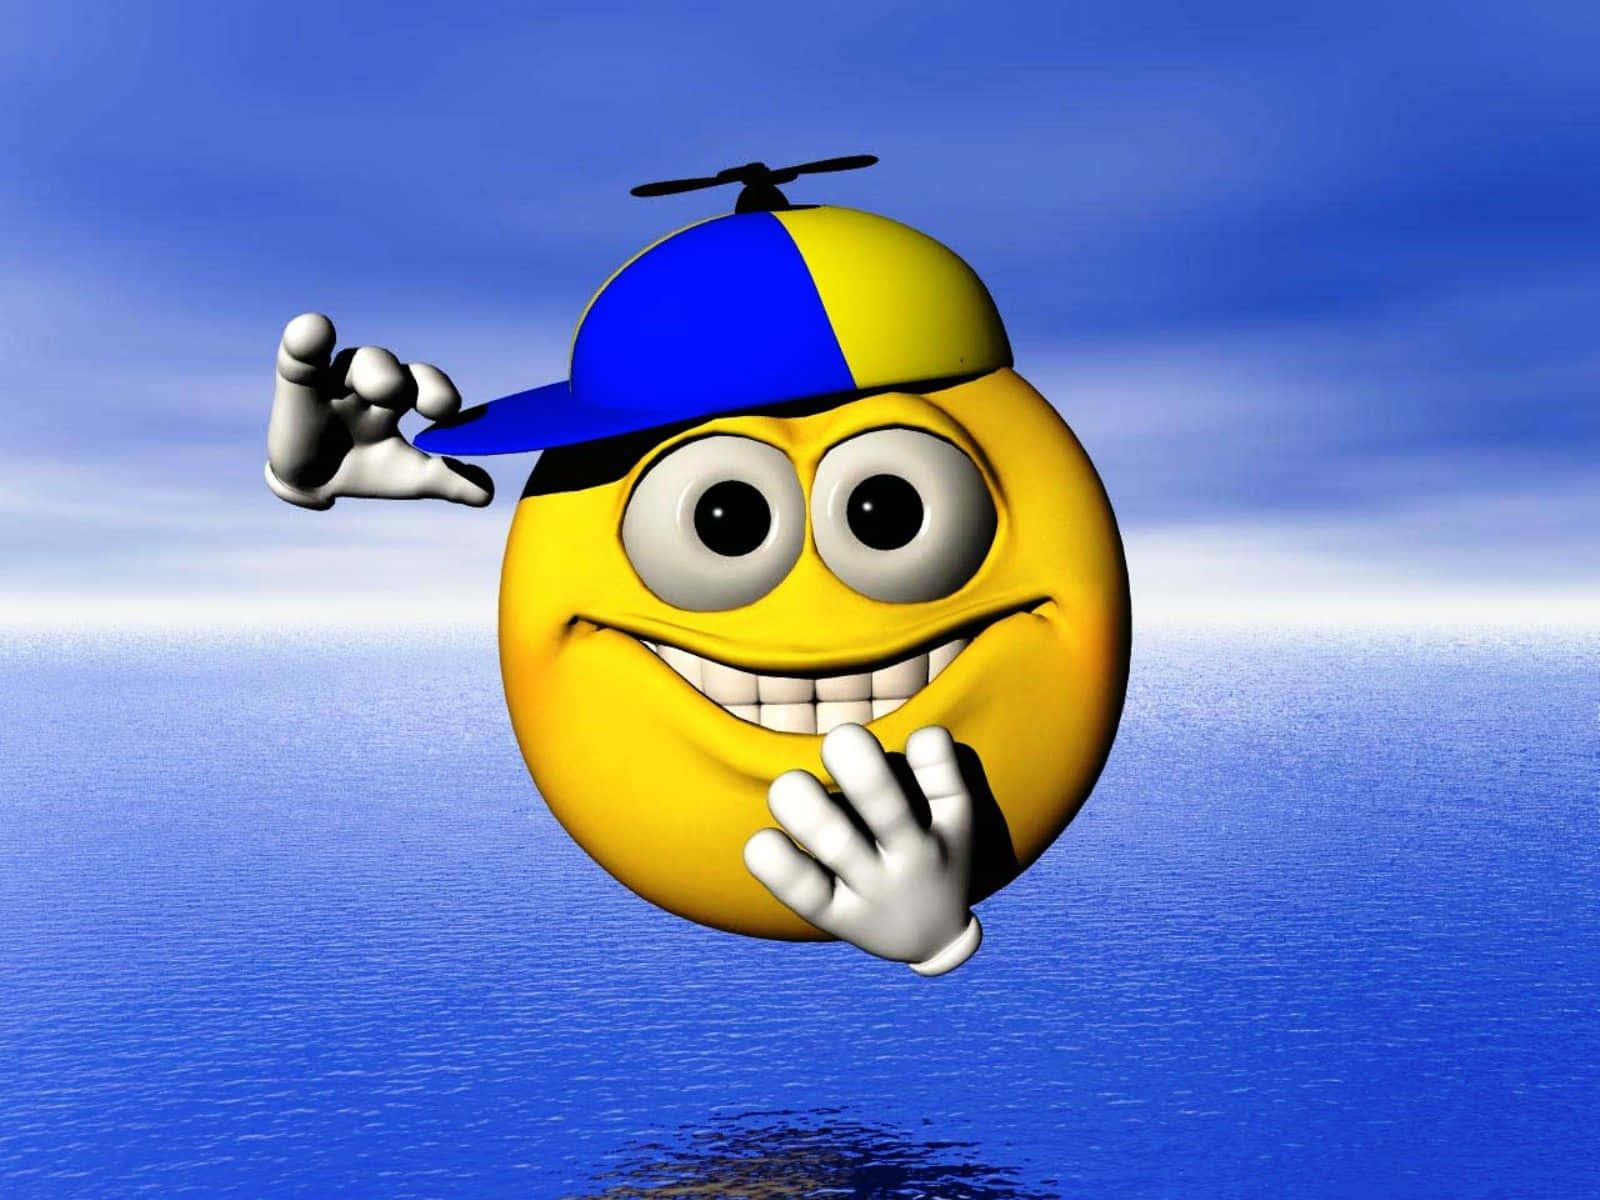 Funny Face 3d Smiley Wearing A Cap Wallpaper